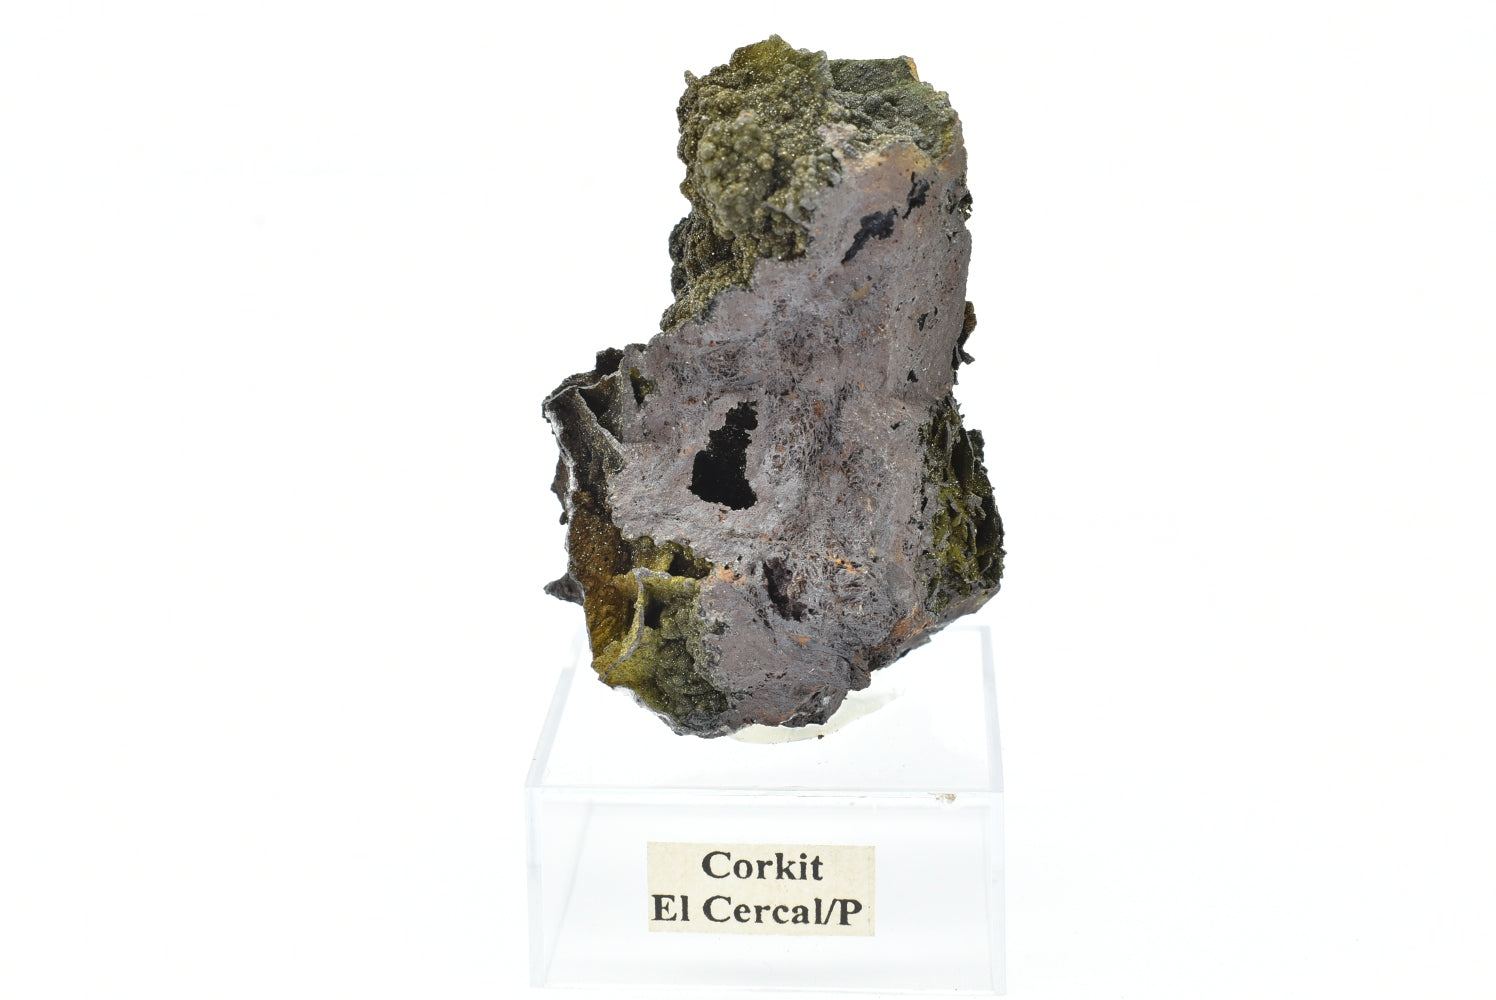 Corkite from El Cercal